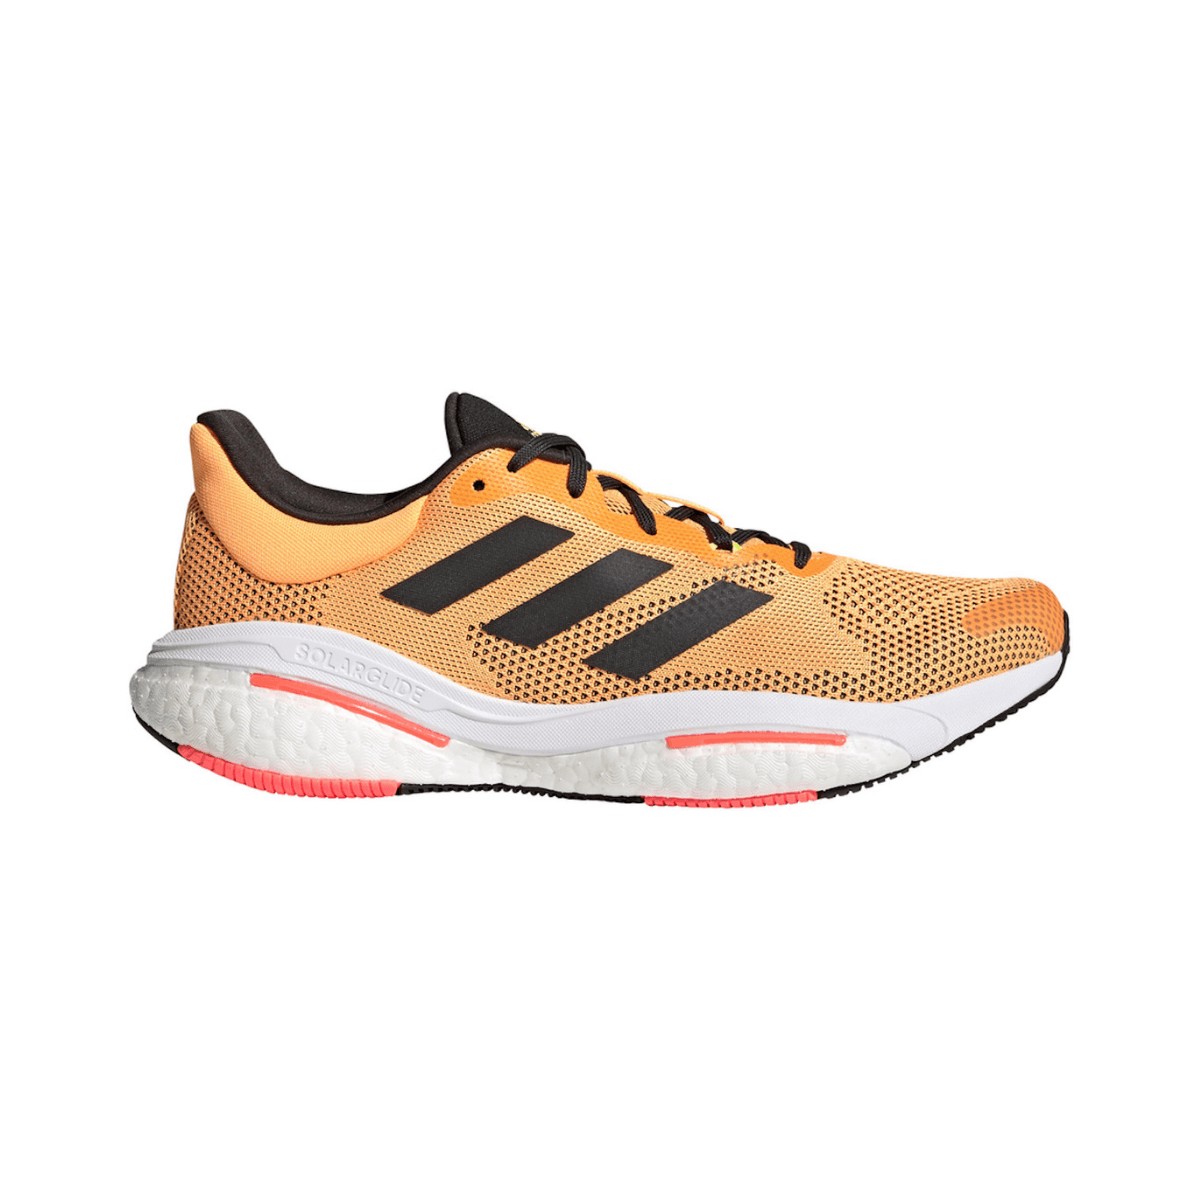 Buy Adidas Solar 5 M Shoes at the Best Price